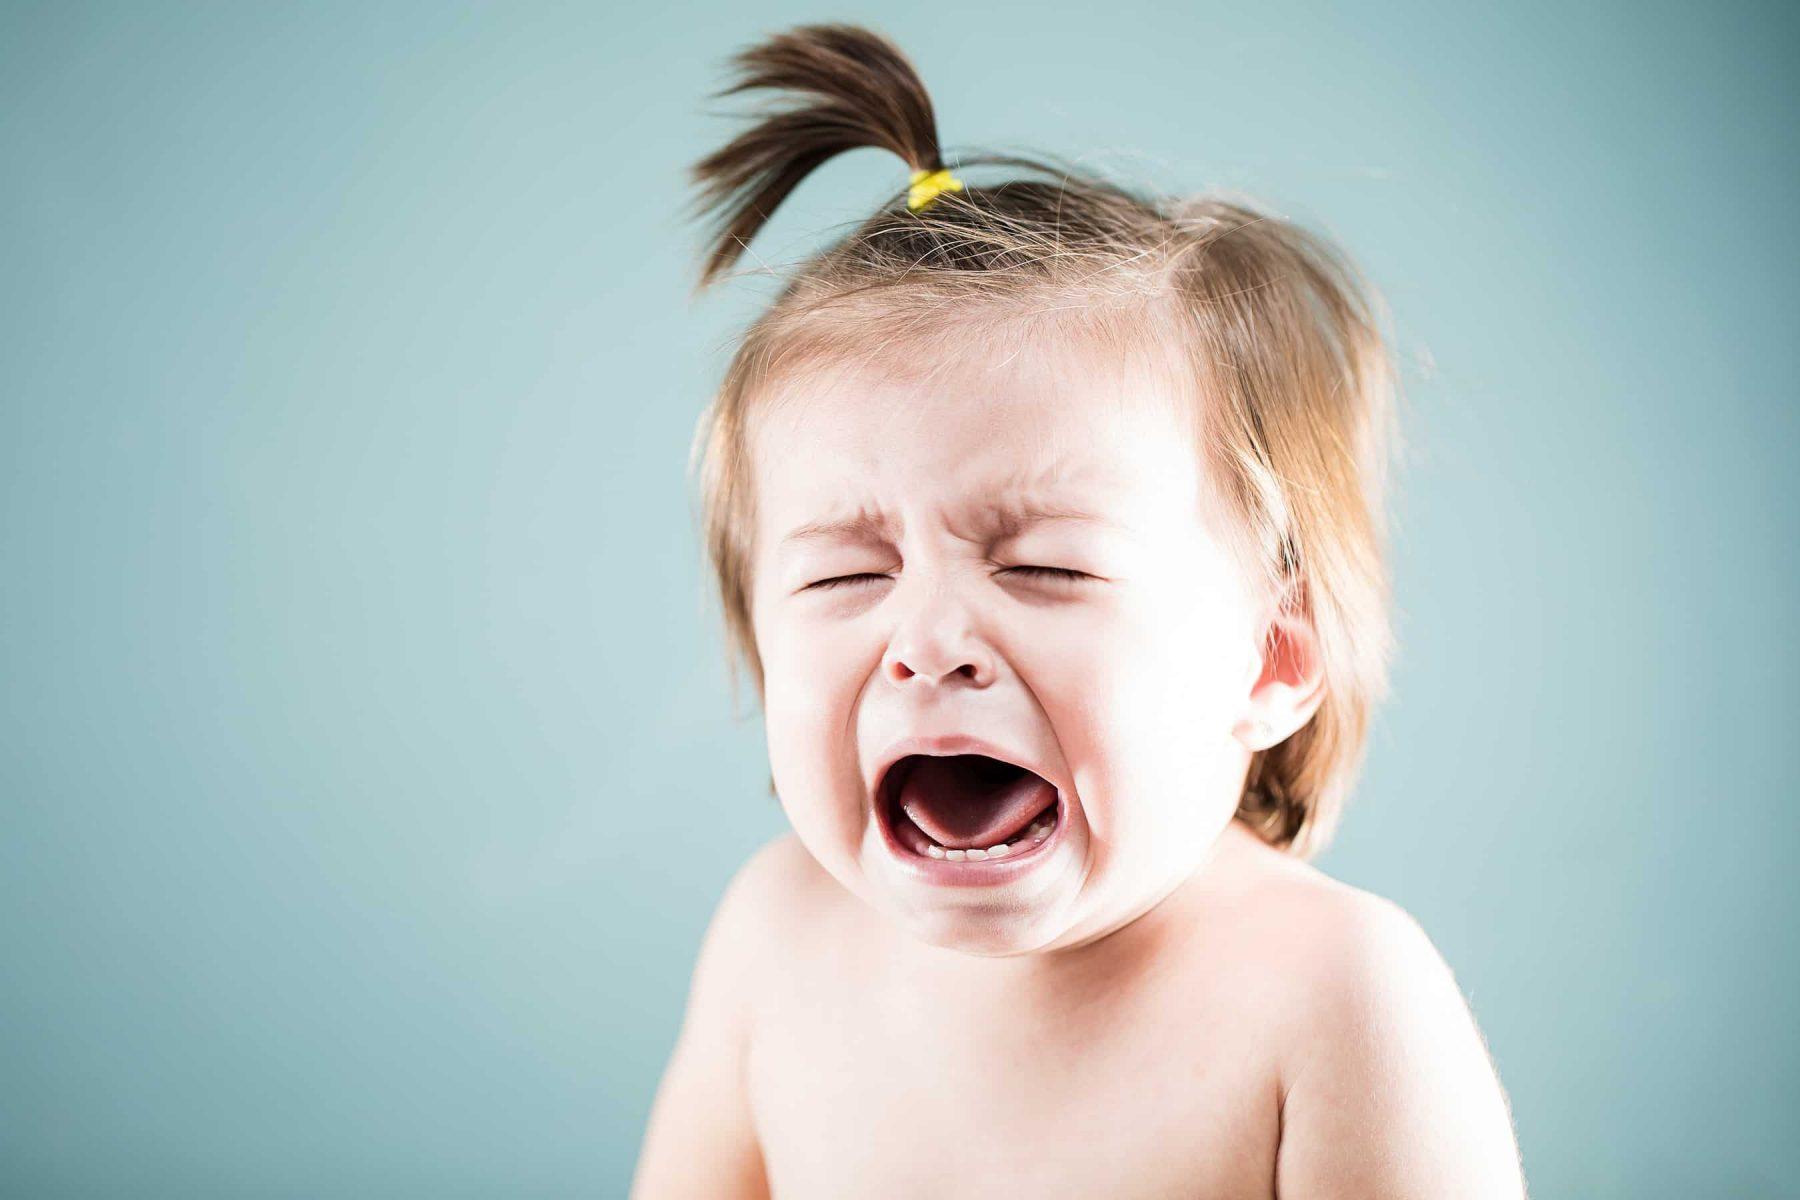 Toddler Tantrums When to Worry Are my Toddler's Tantrums